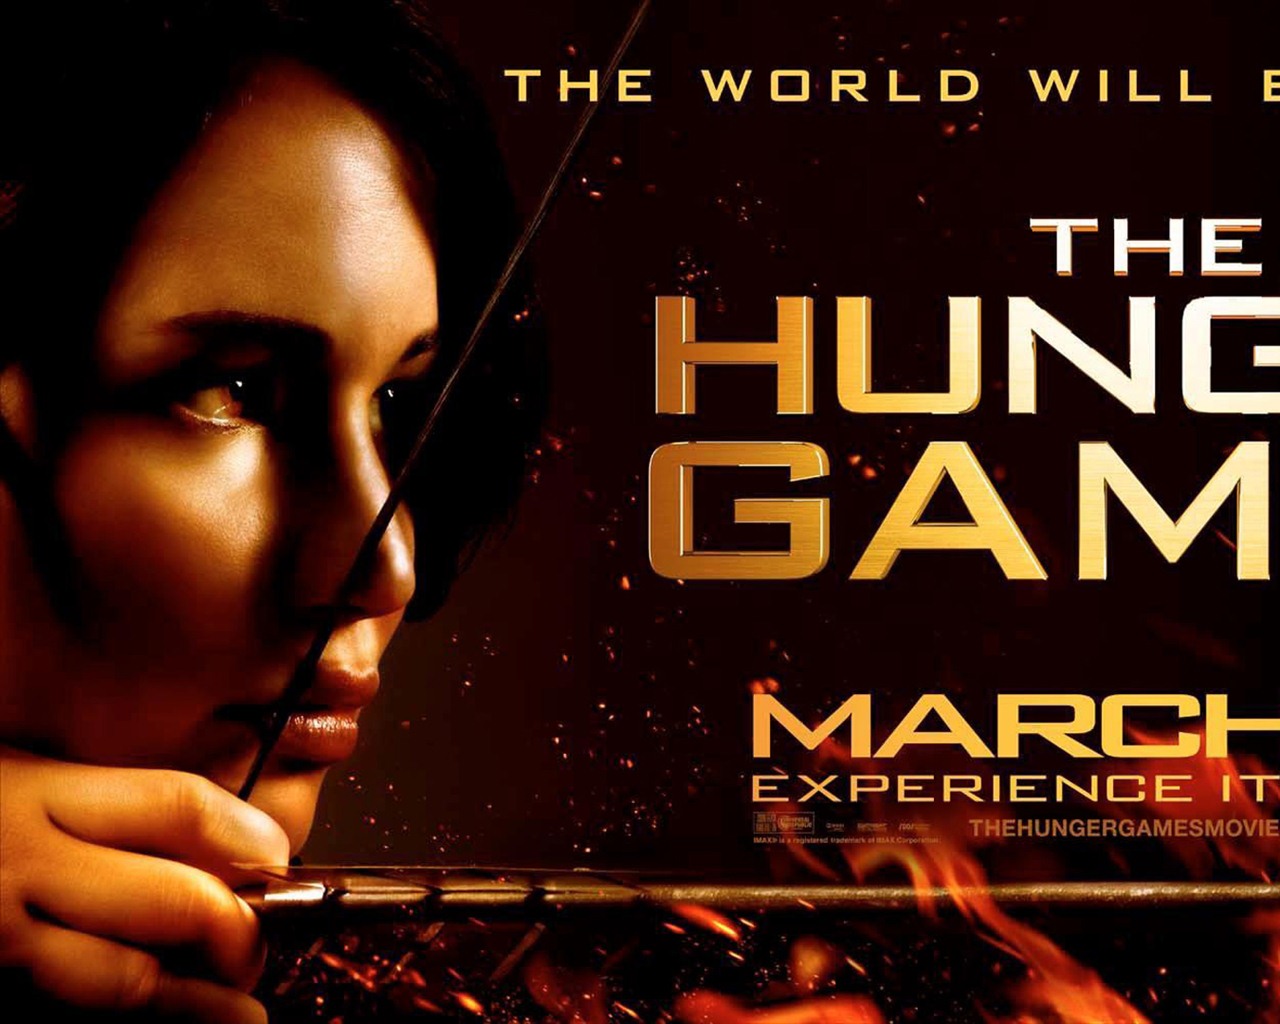 The Hunger Games HD wallpapers #5 - 1280x1024